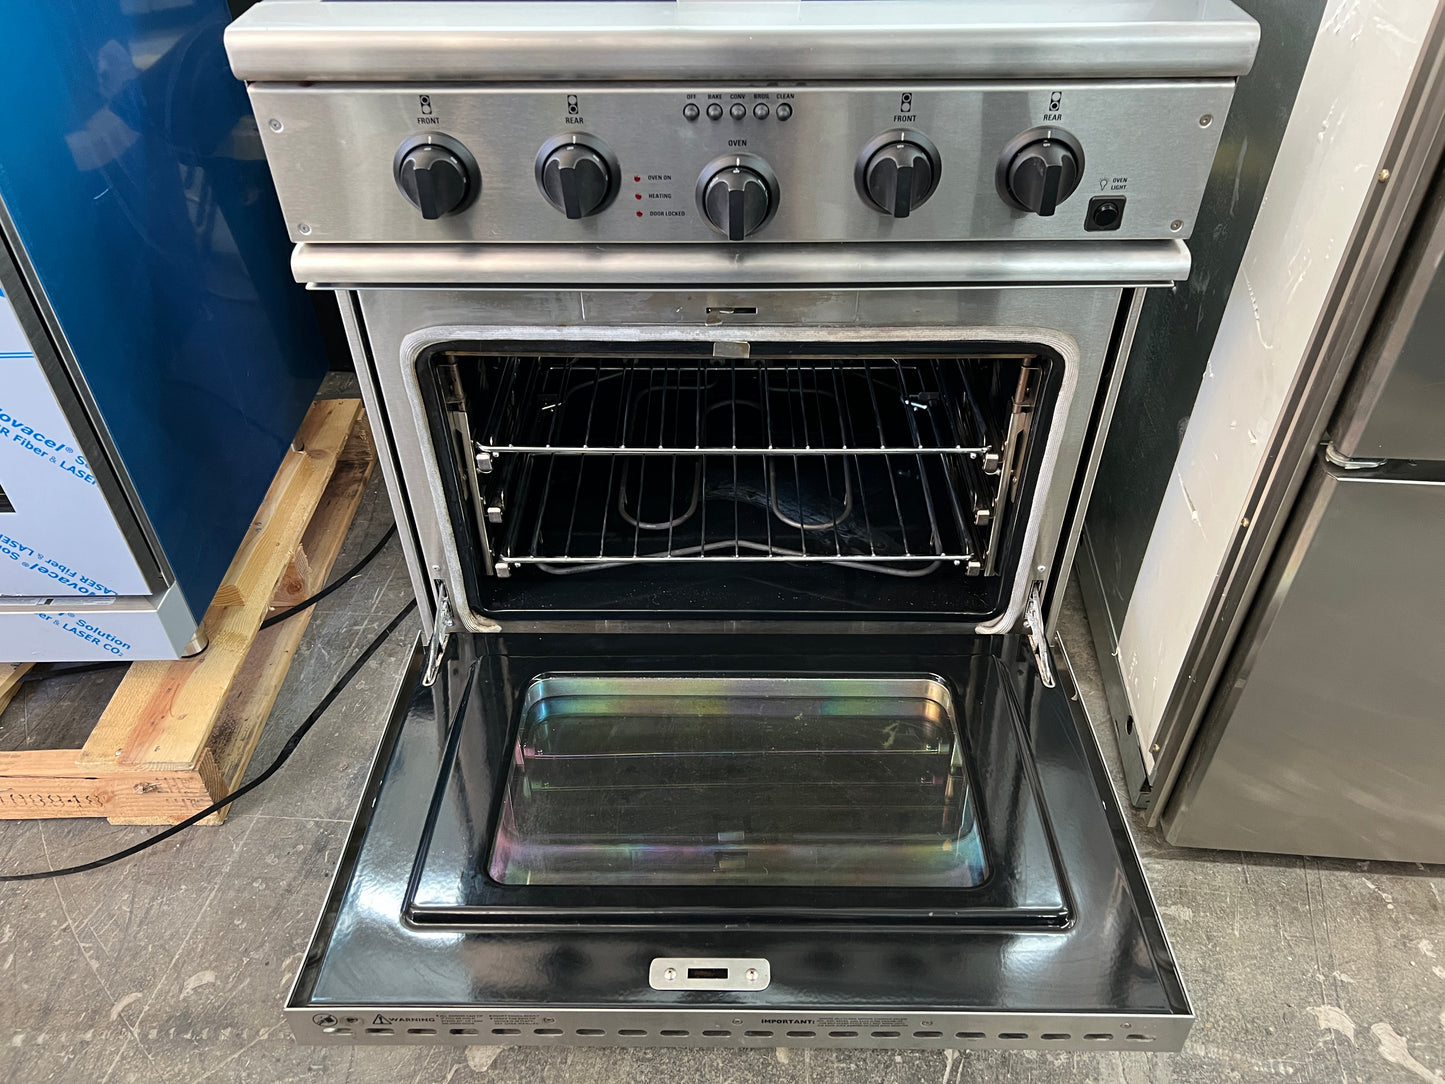 GE Monogram 30 Inch Commercial Gas Range Dual Fuel, Convection Oven, 4 Open Burners, ZDP30N4YSS Convection Oven, Stainless Steel, 369159